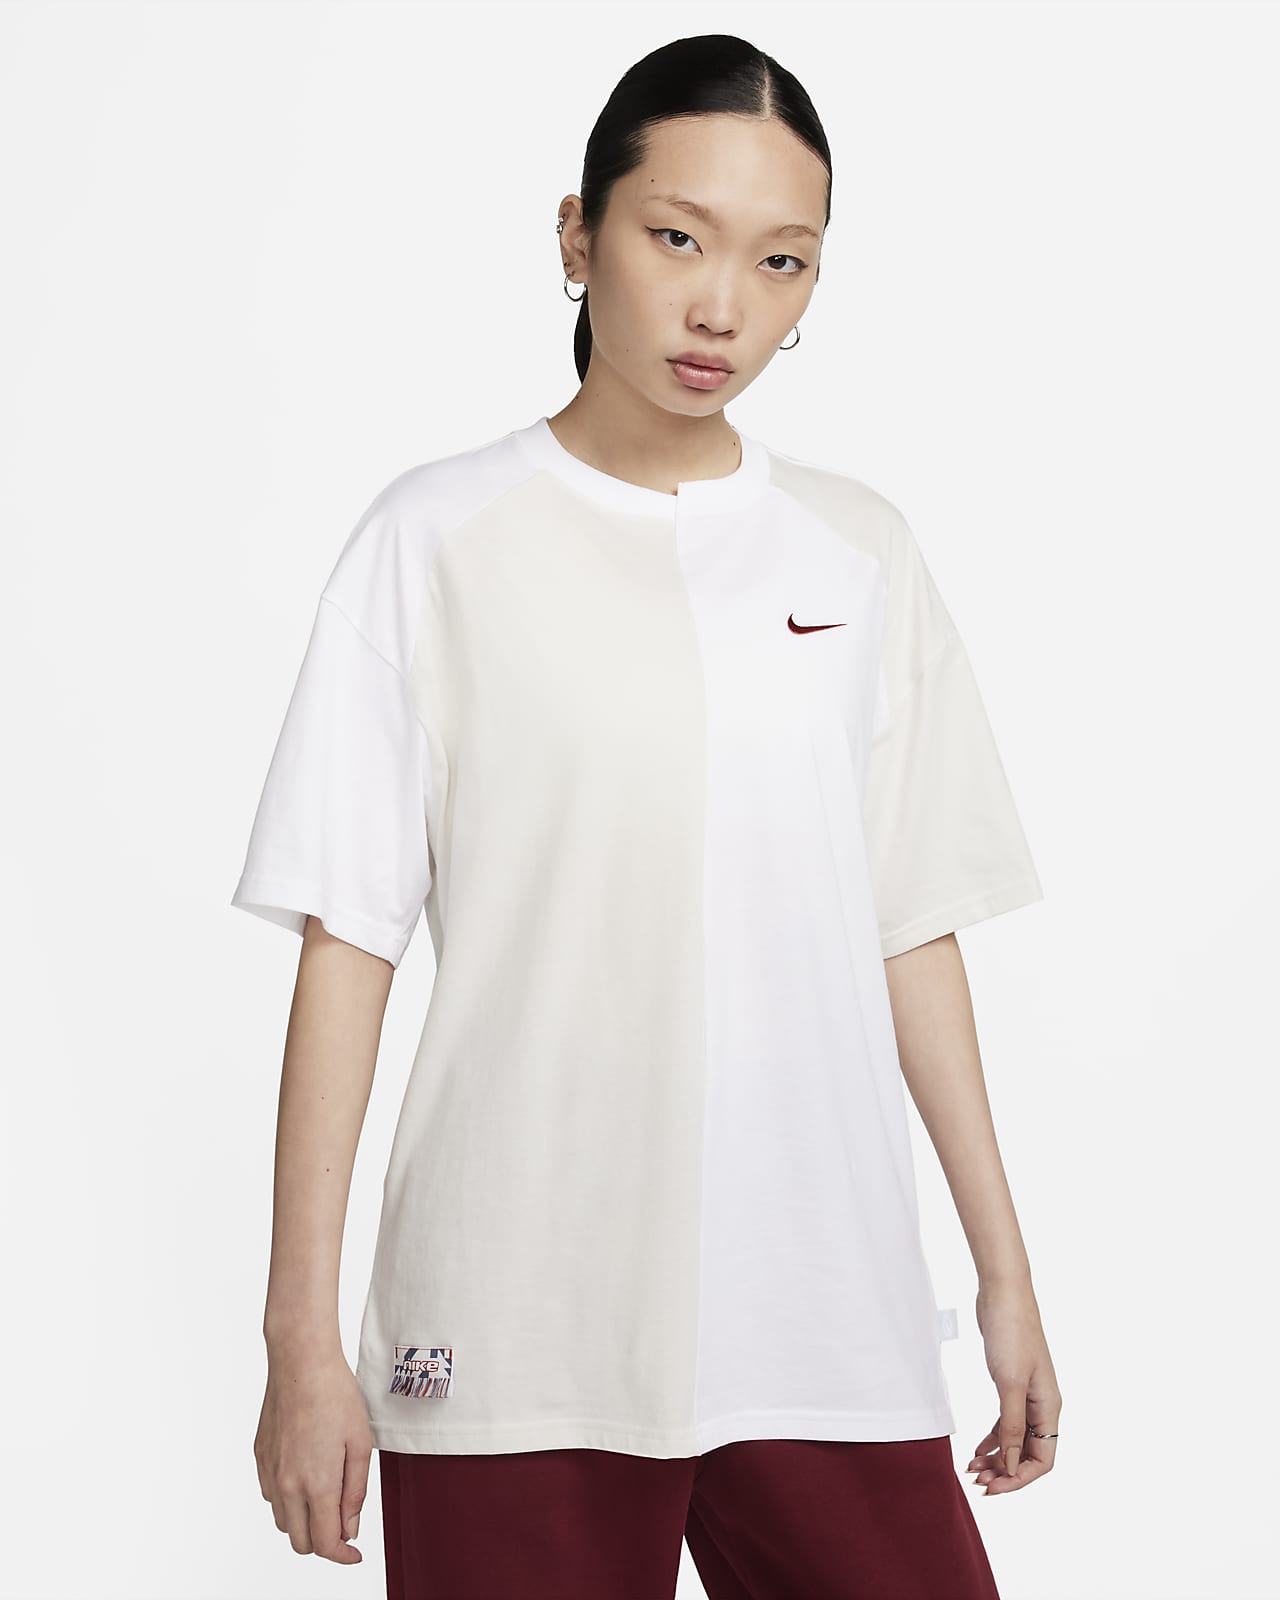 Nike Collection Over-Oversized Top. Nike JP